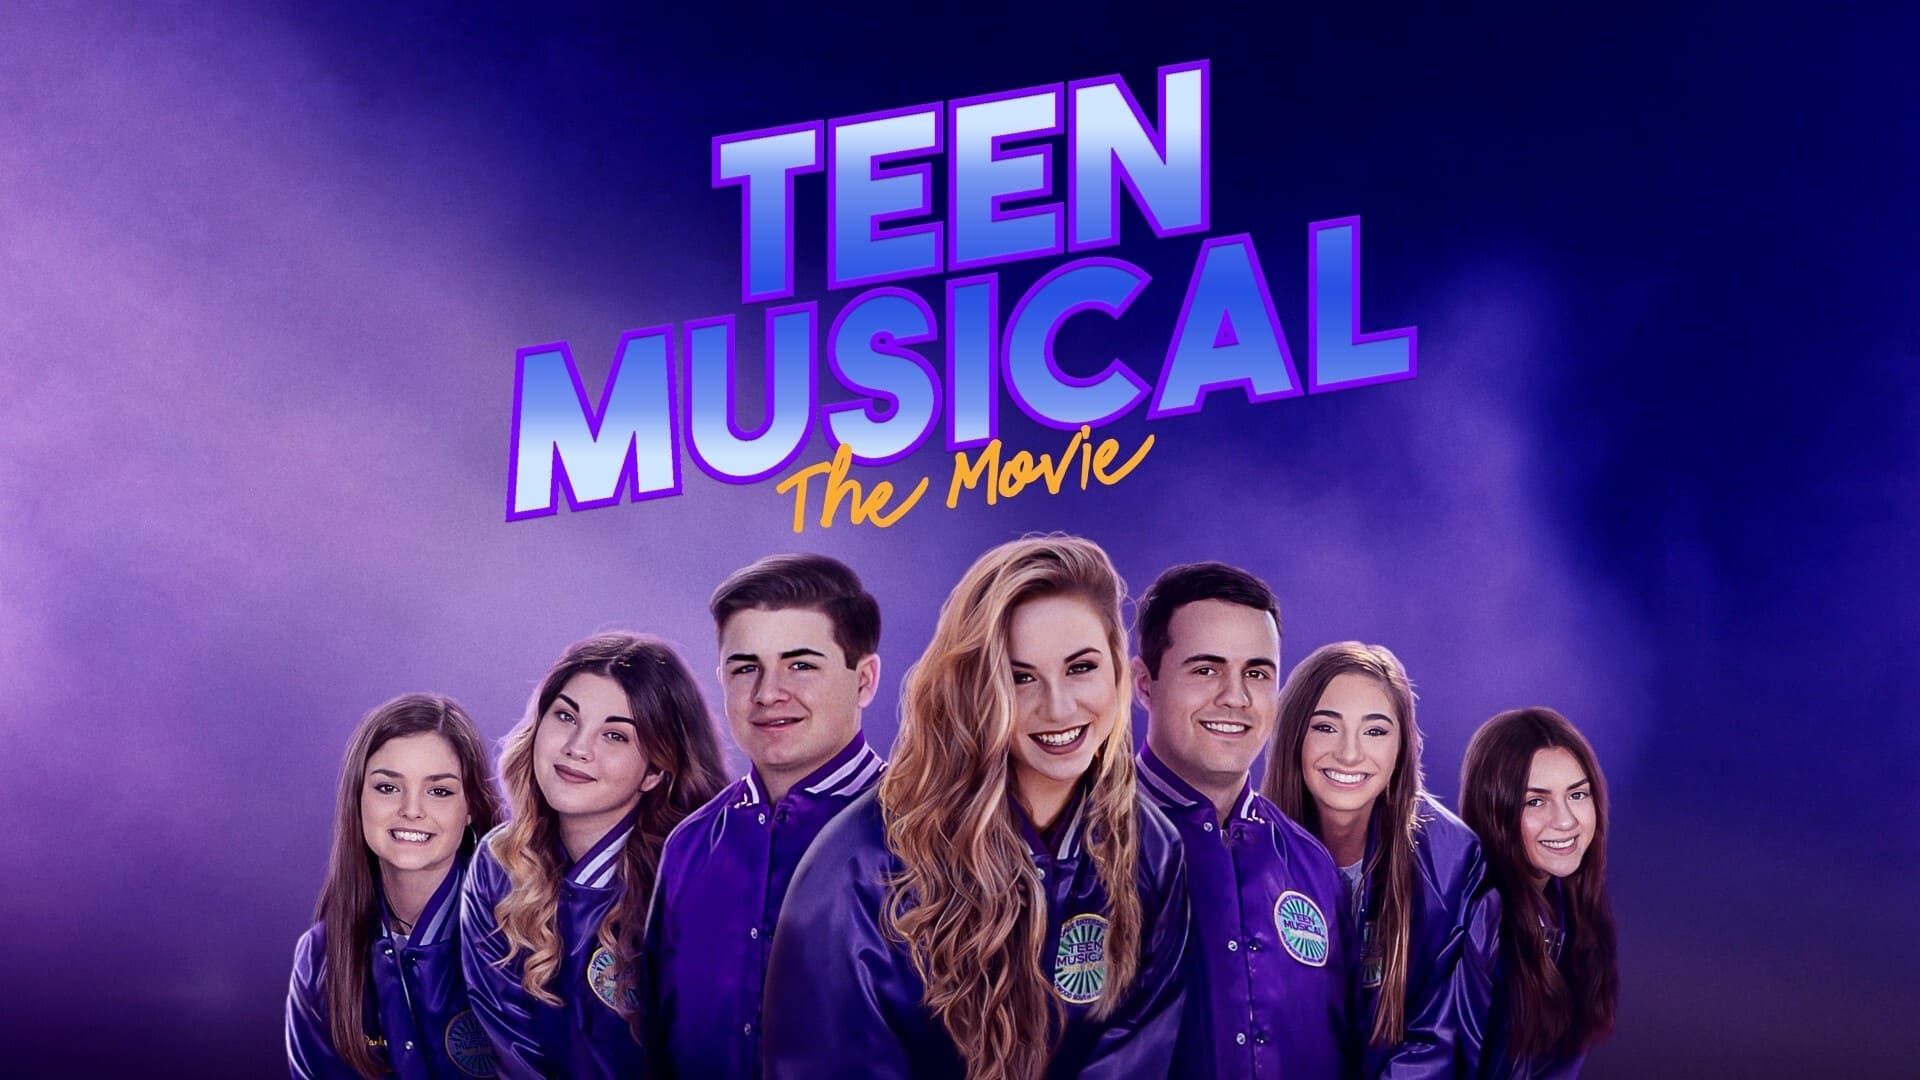 Teen Musical - The Movie background